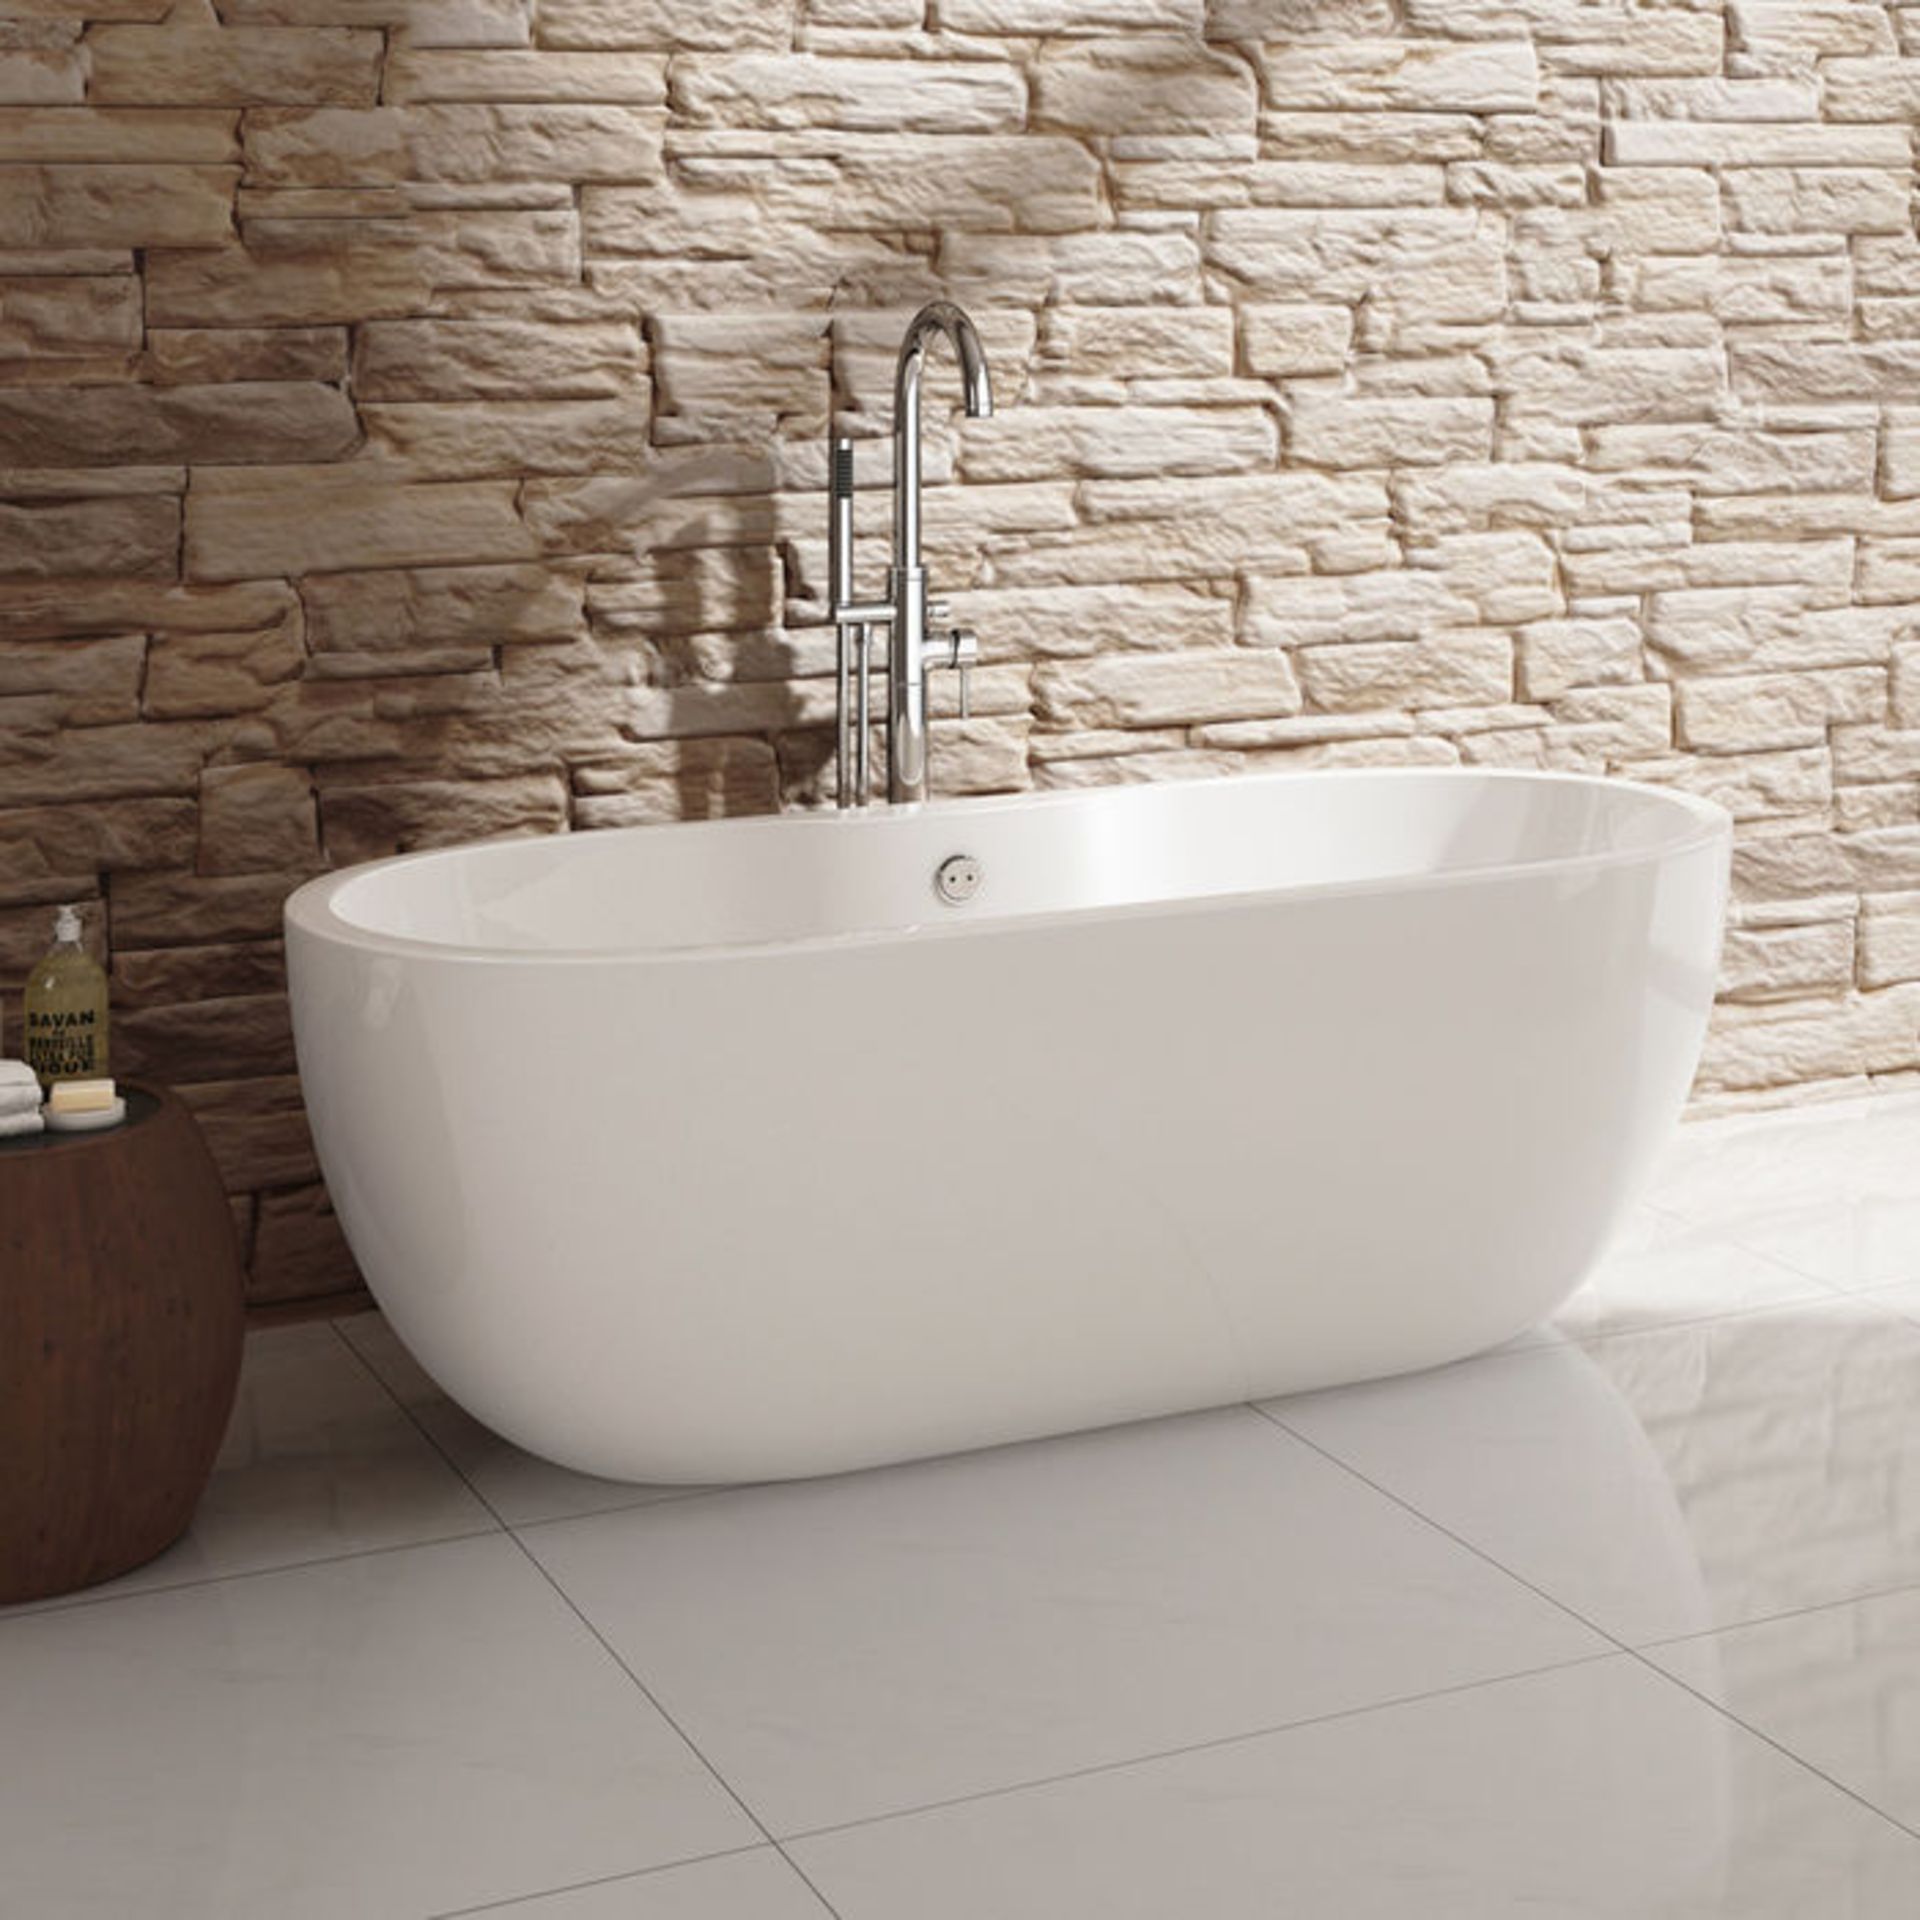 (S5) 1655x750mm Melissa Freestanding Bath - Large. Showcasing contemporary clean lines for a